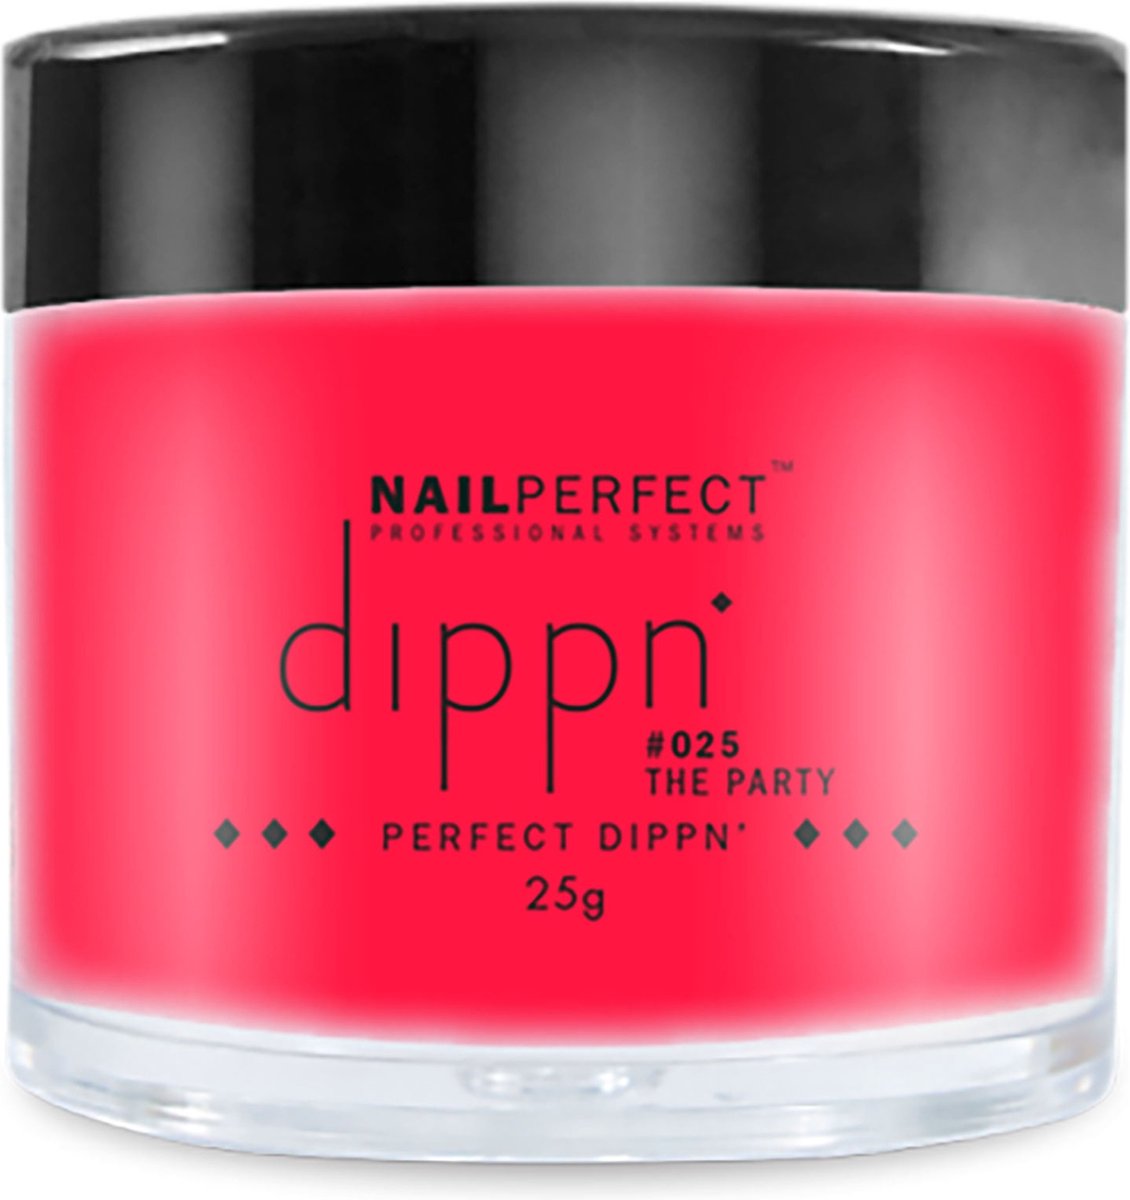 Nail Perfect - Dippn - #025 The Party - 25gr